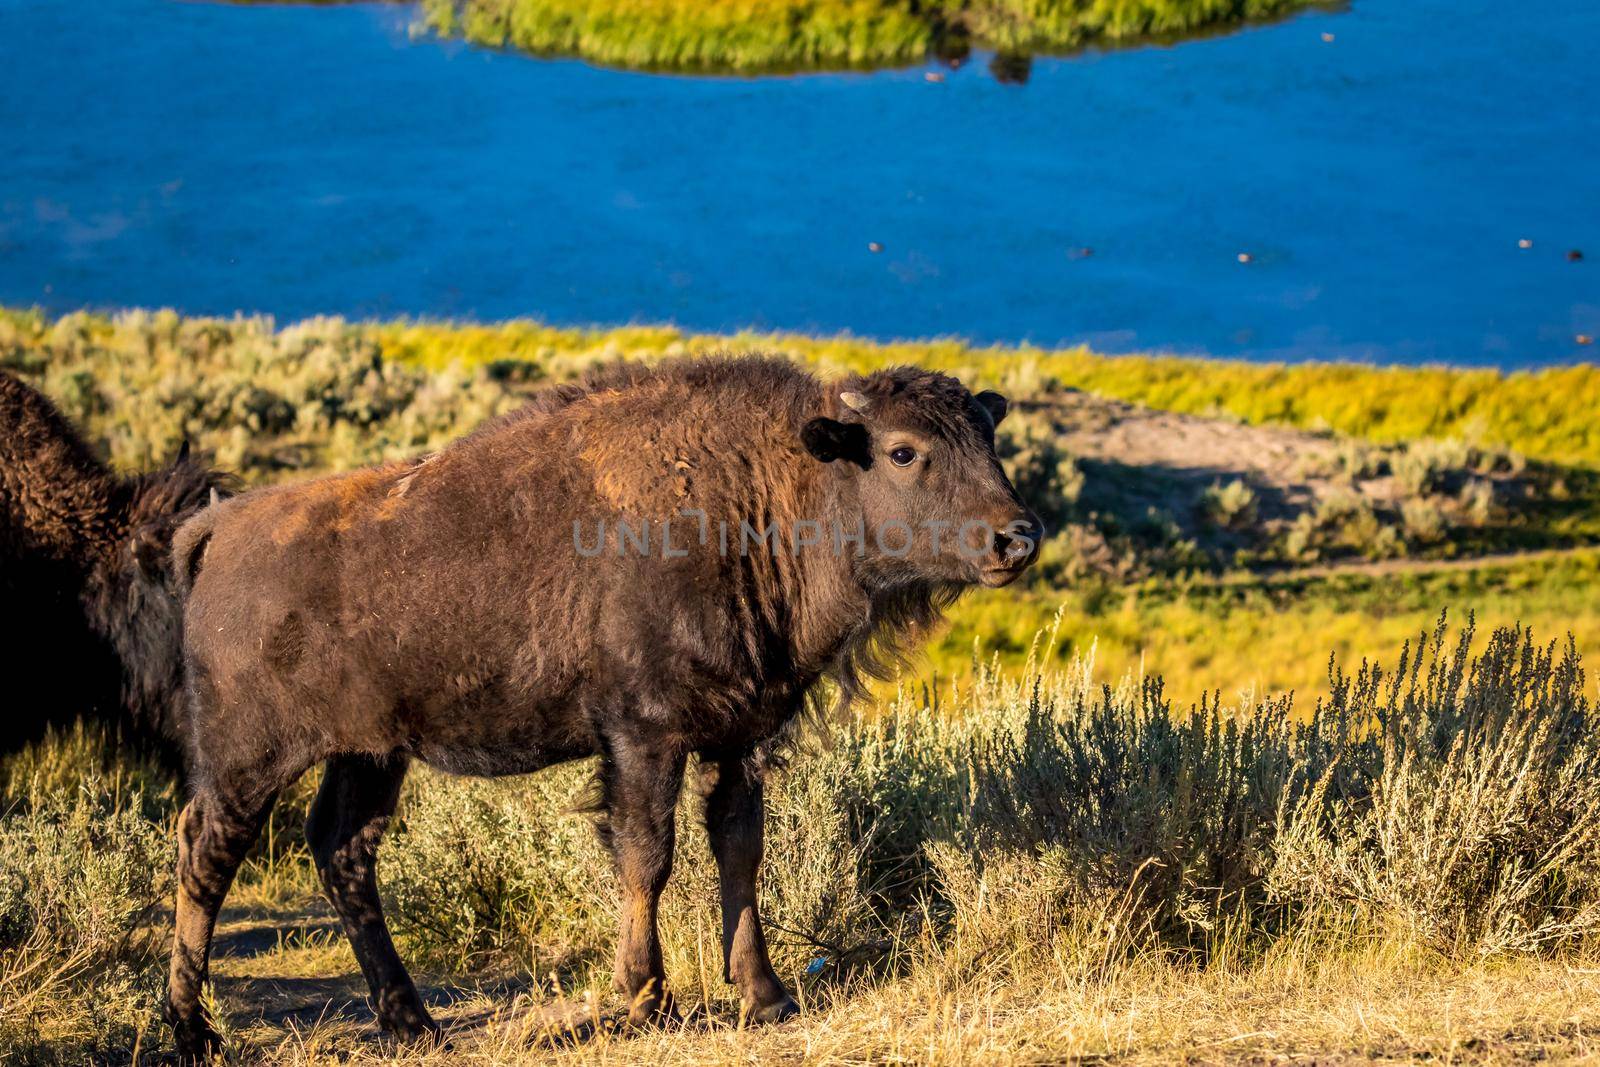 WIld bison calf at Yellowstone National Park